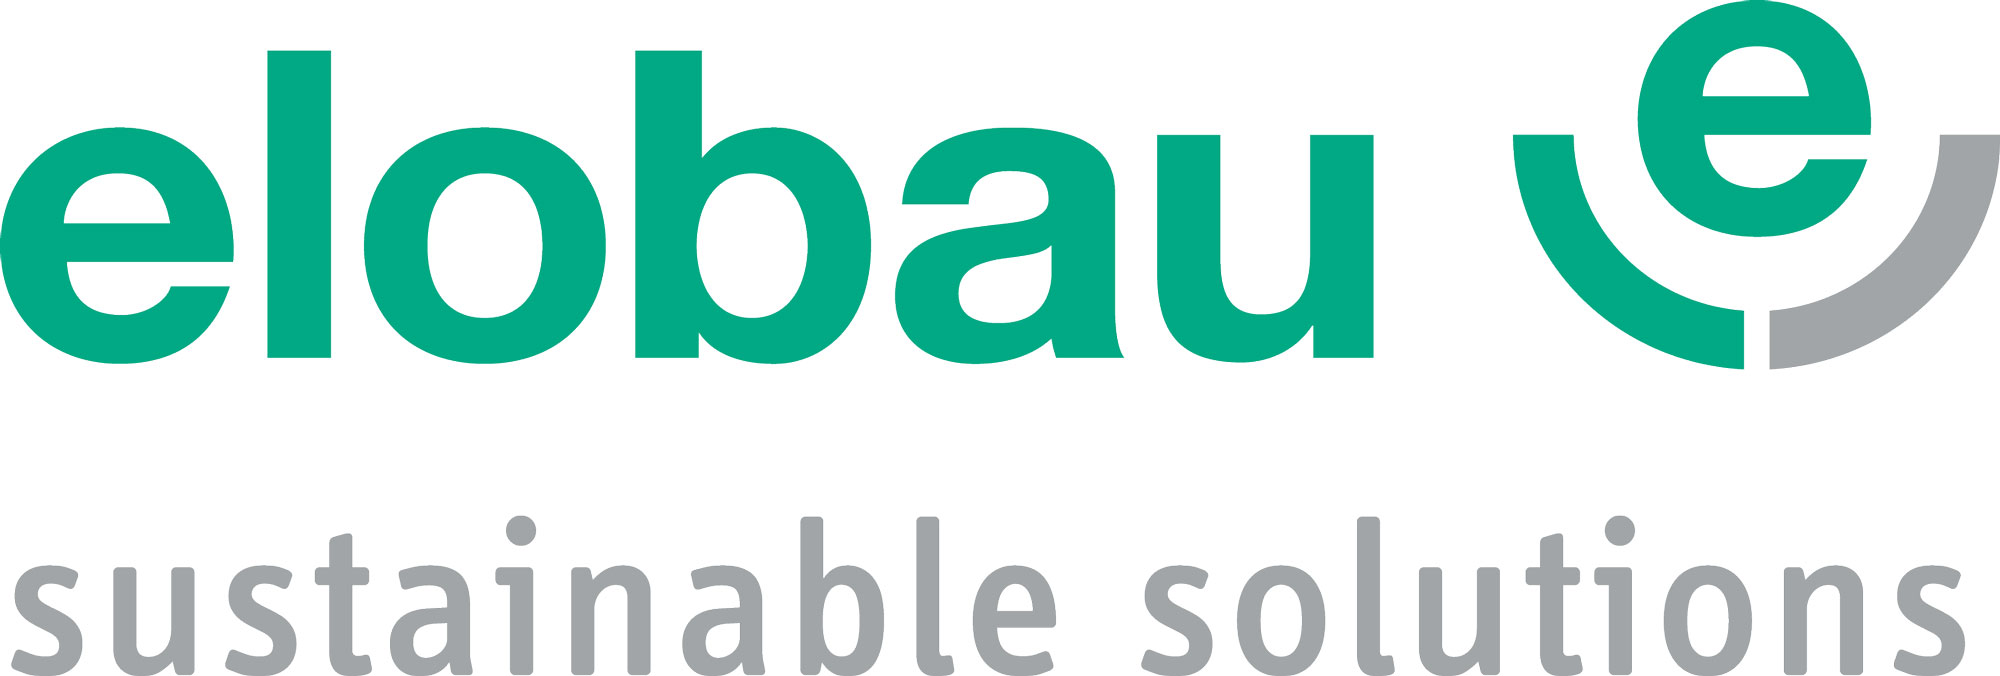 elobau sustainable solutions